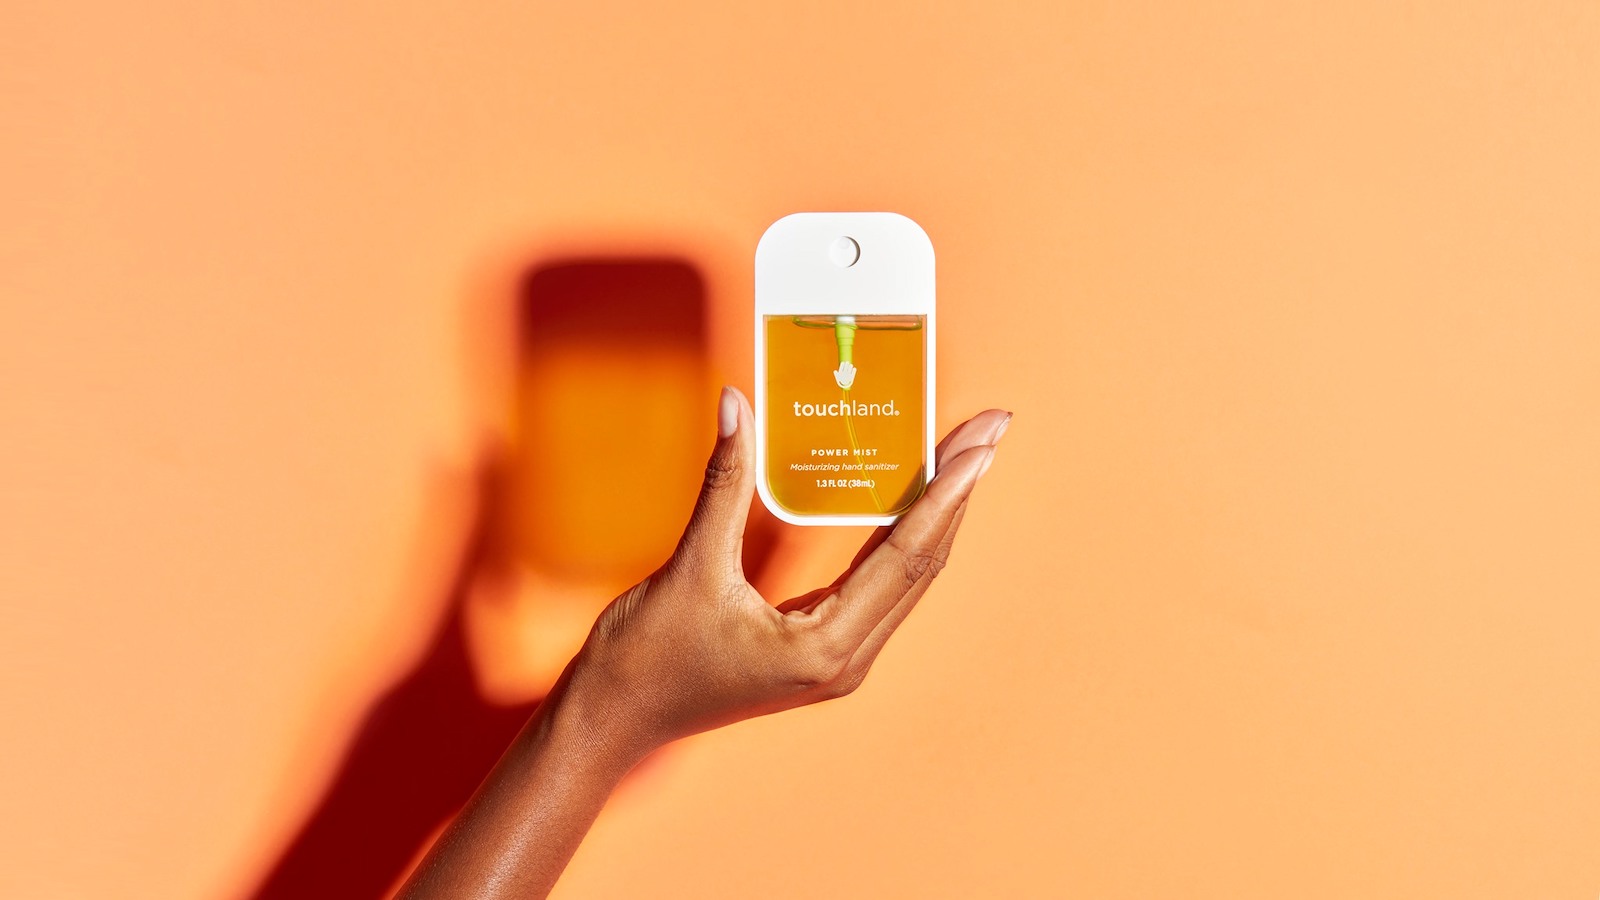 How Touchland Made Hand Sanitizer a Beauty Product [Case Study]